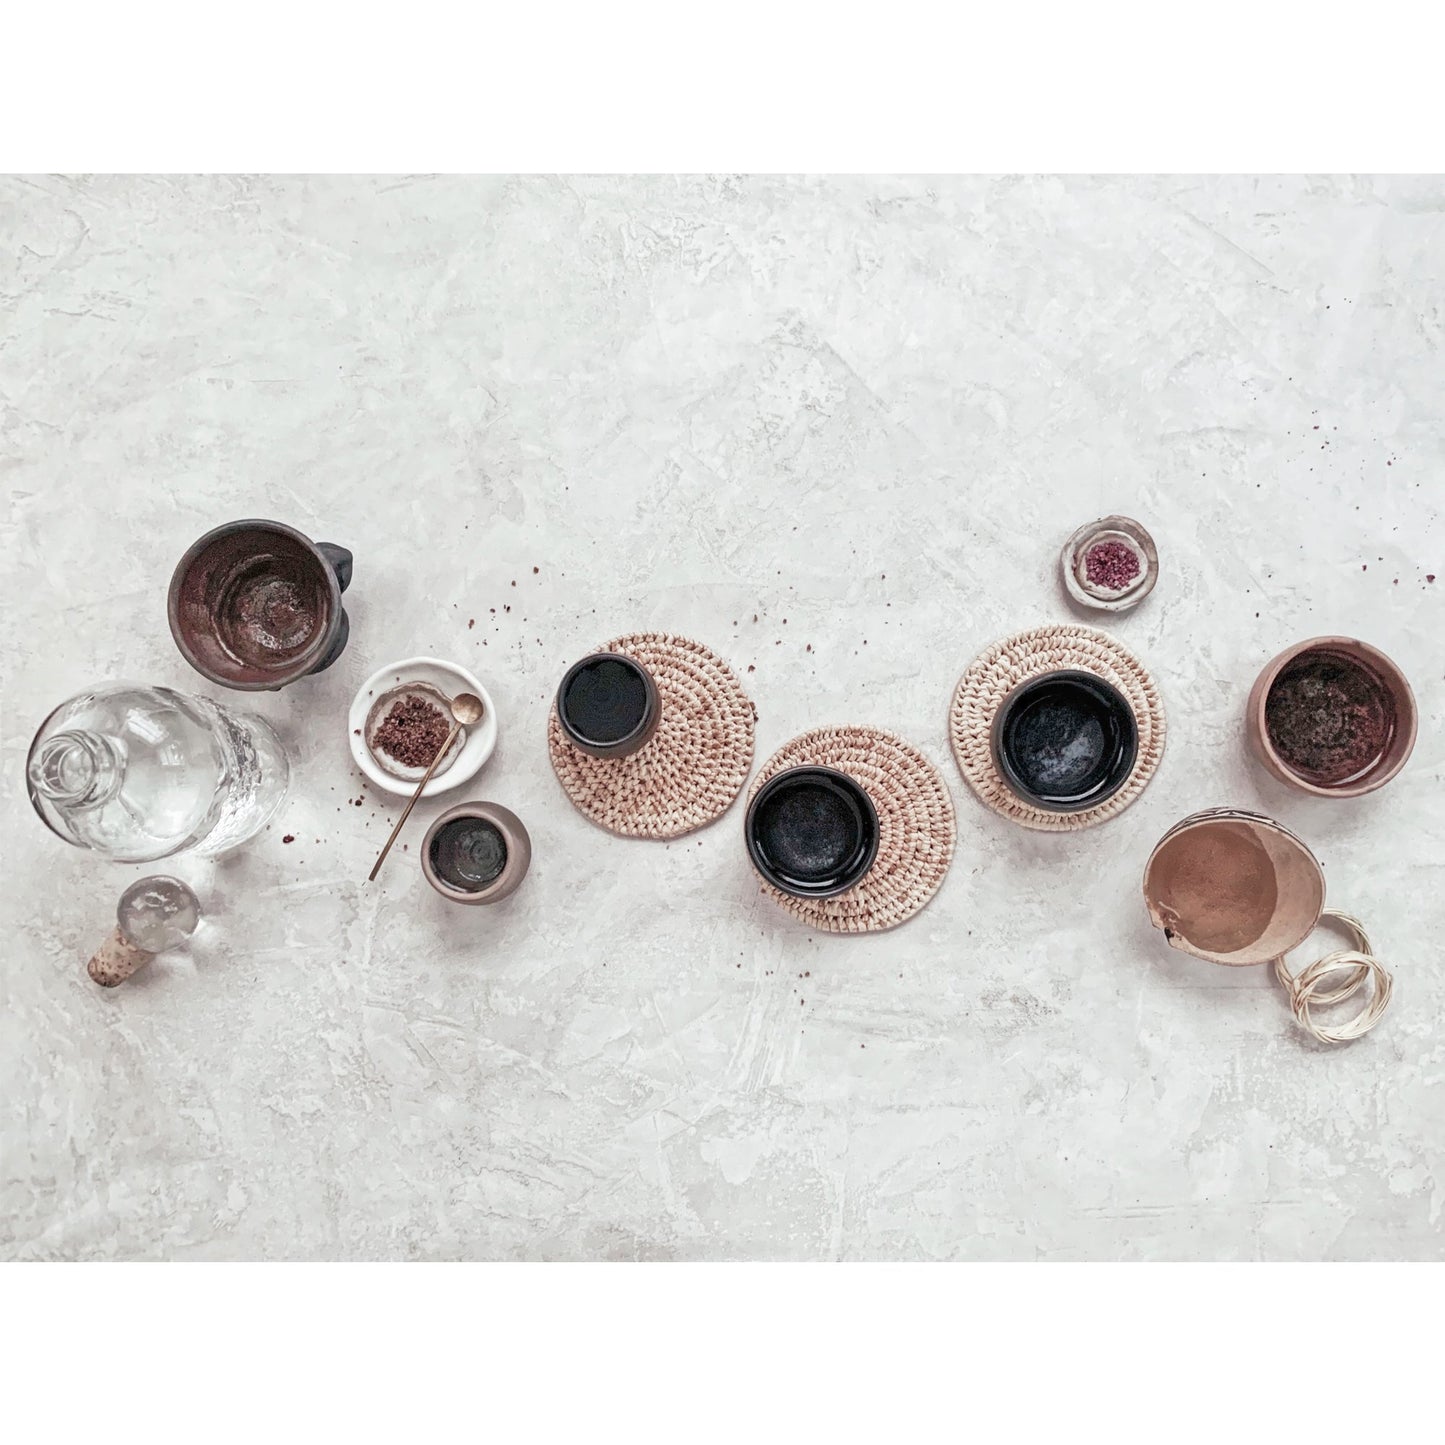 Burnt Clay Mezcal Face Cups | Mezcal Copitas | Clay Shot Glasses | Tequila Shooters | Espresso Cups | Handmade in Oaxaca, Mexico